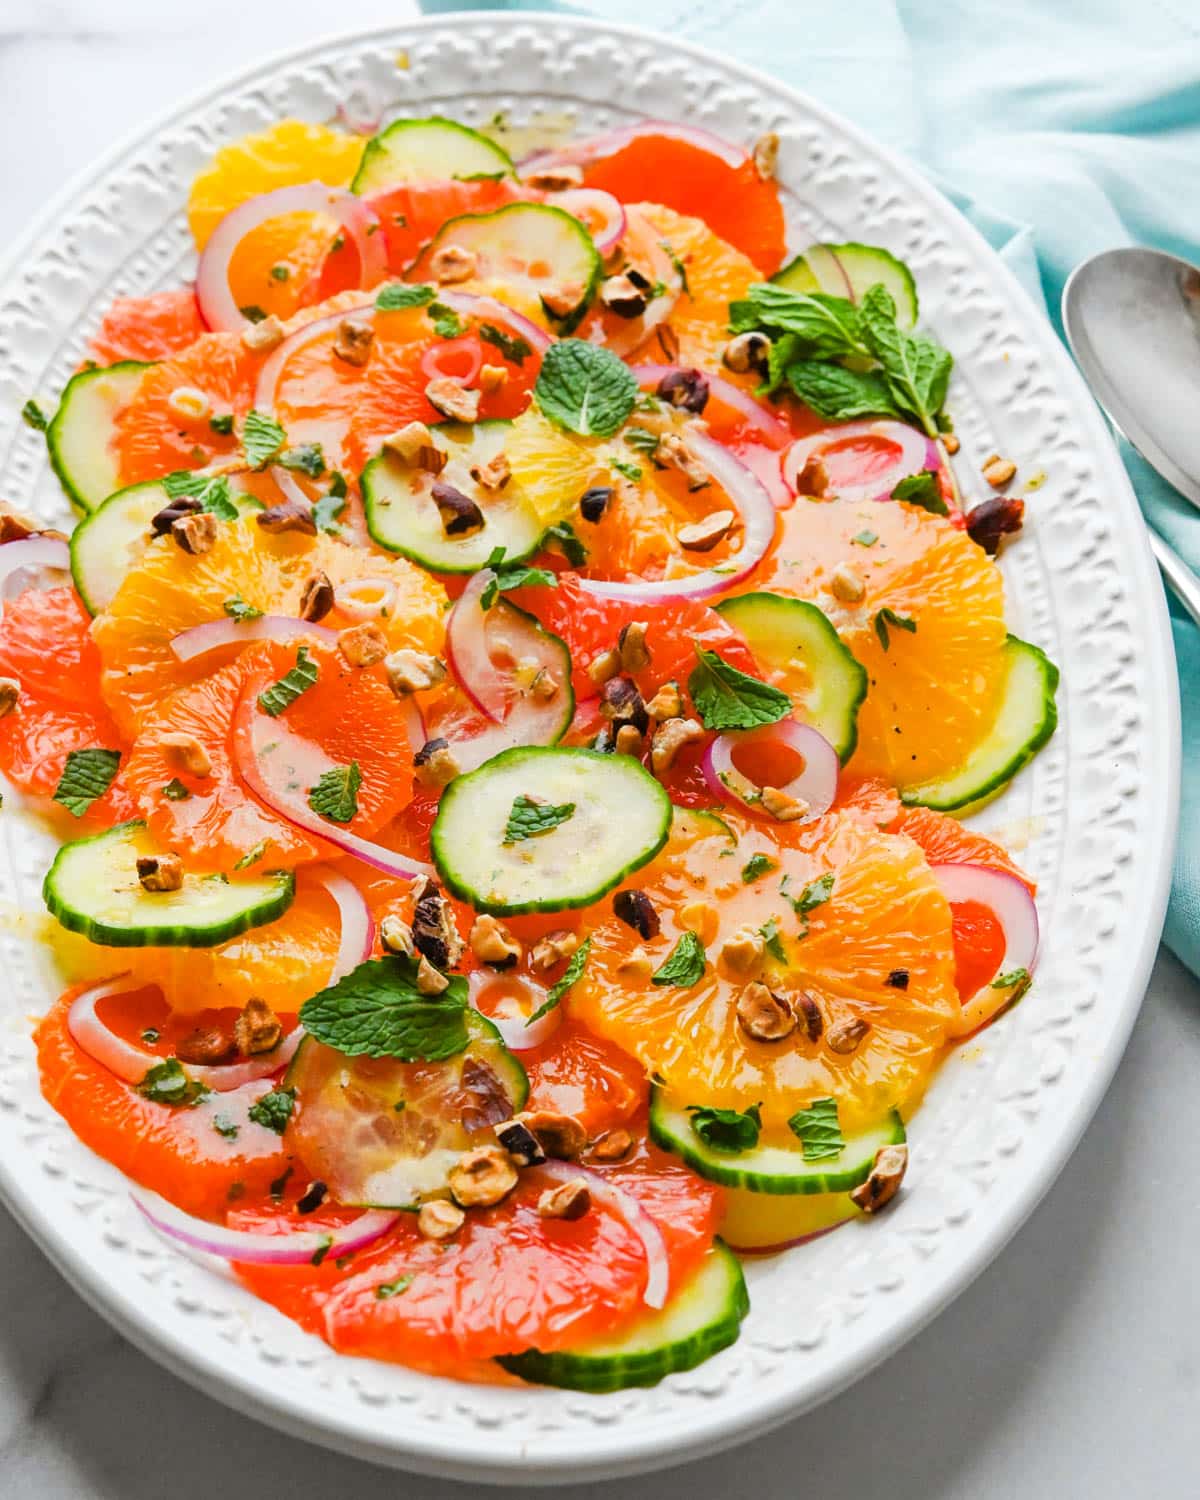 A platter of winter citrus salad with chopped hazelnuts.